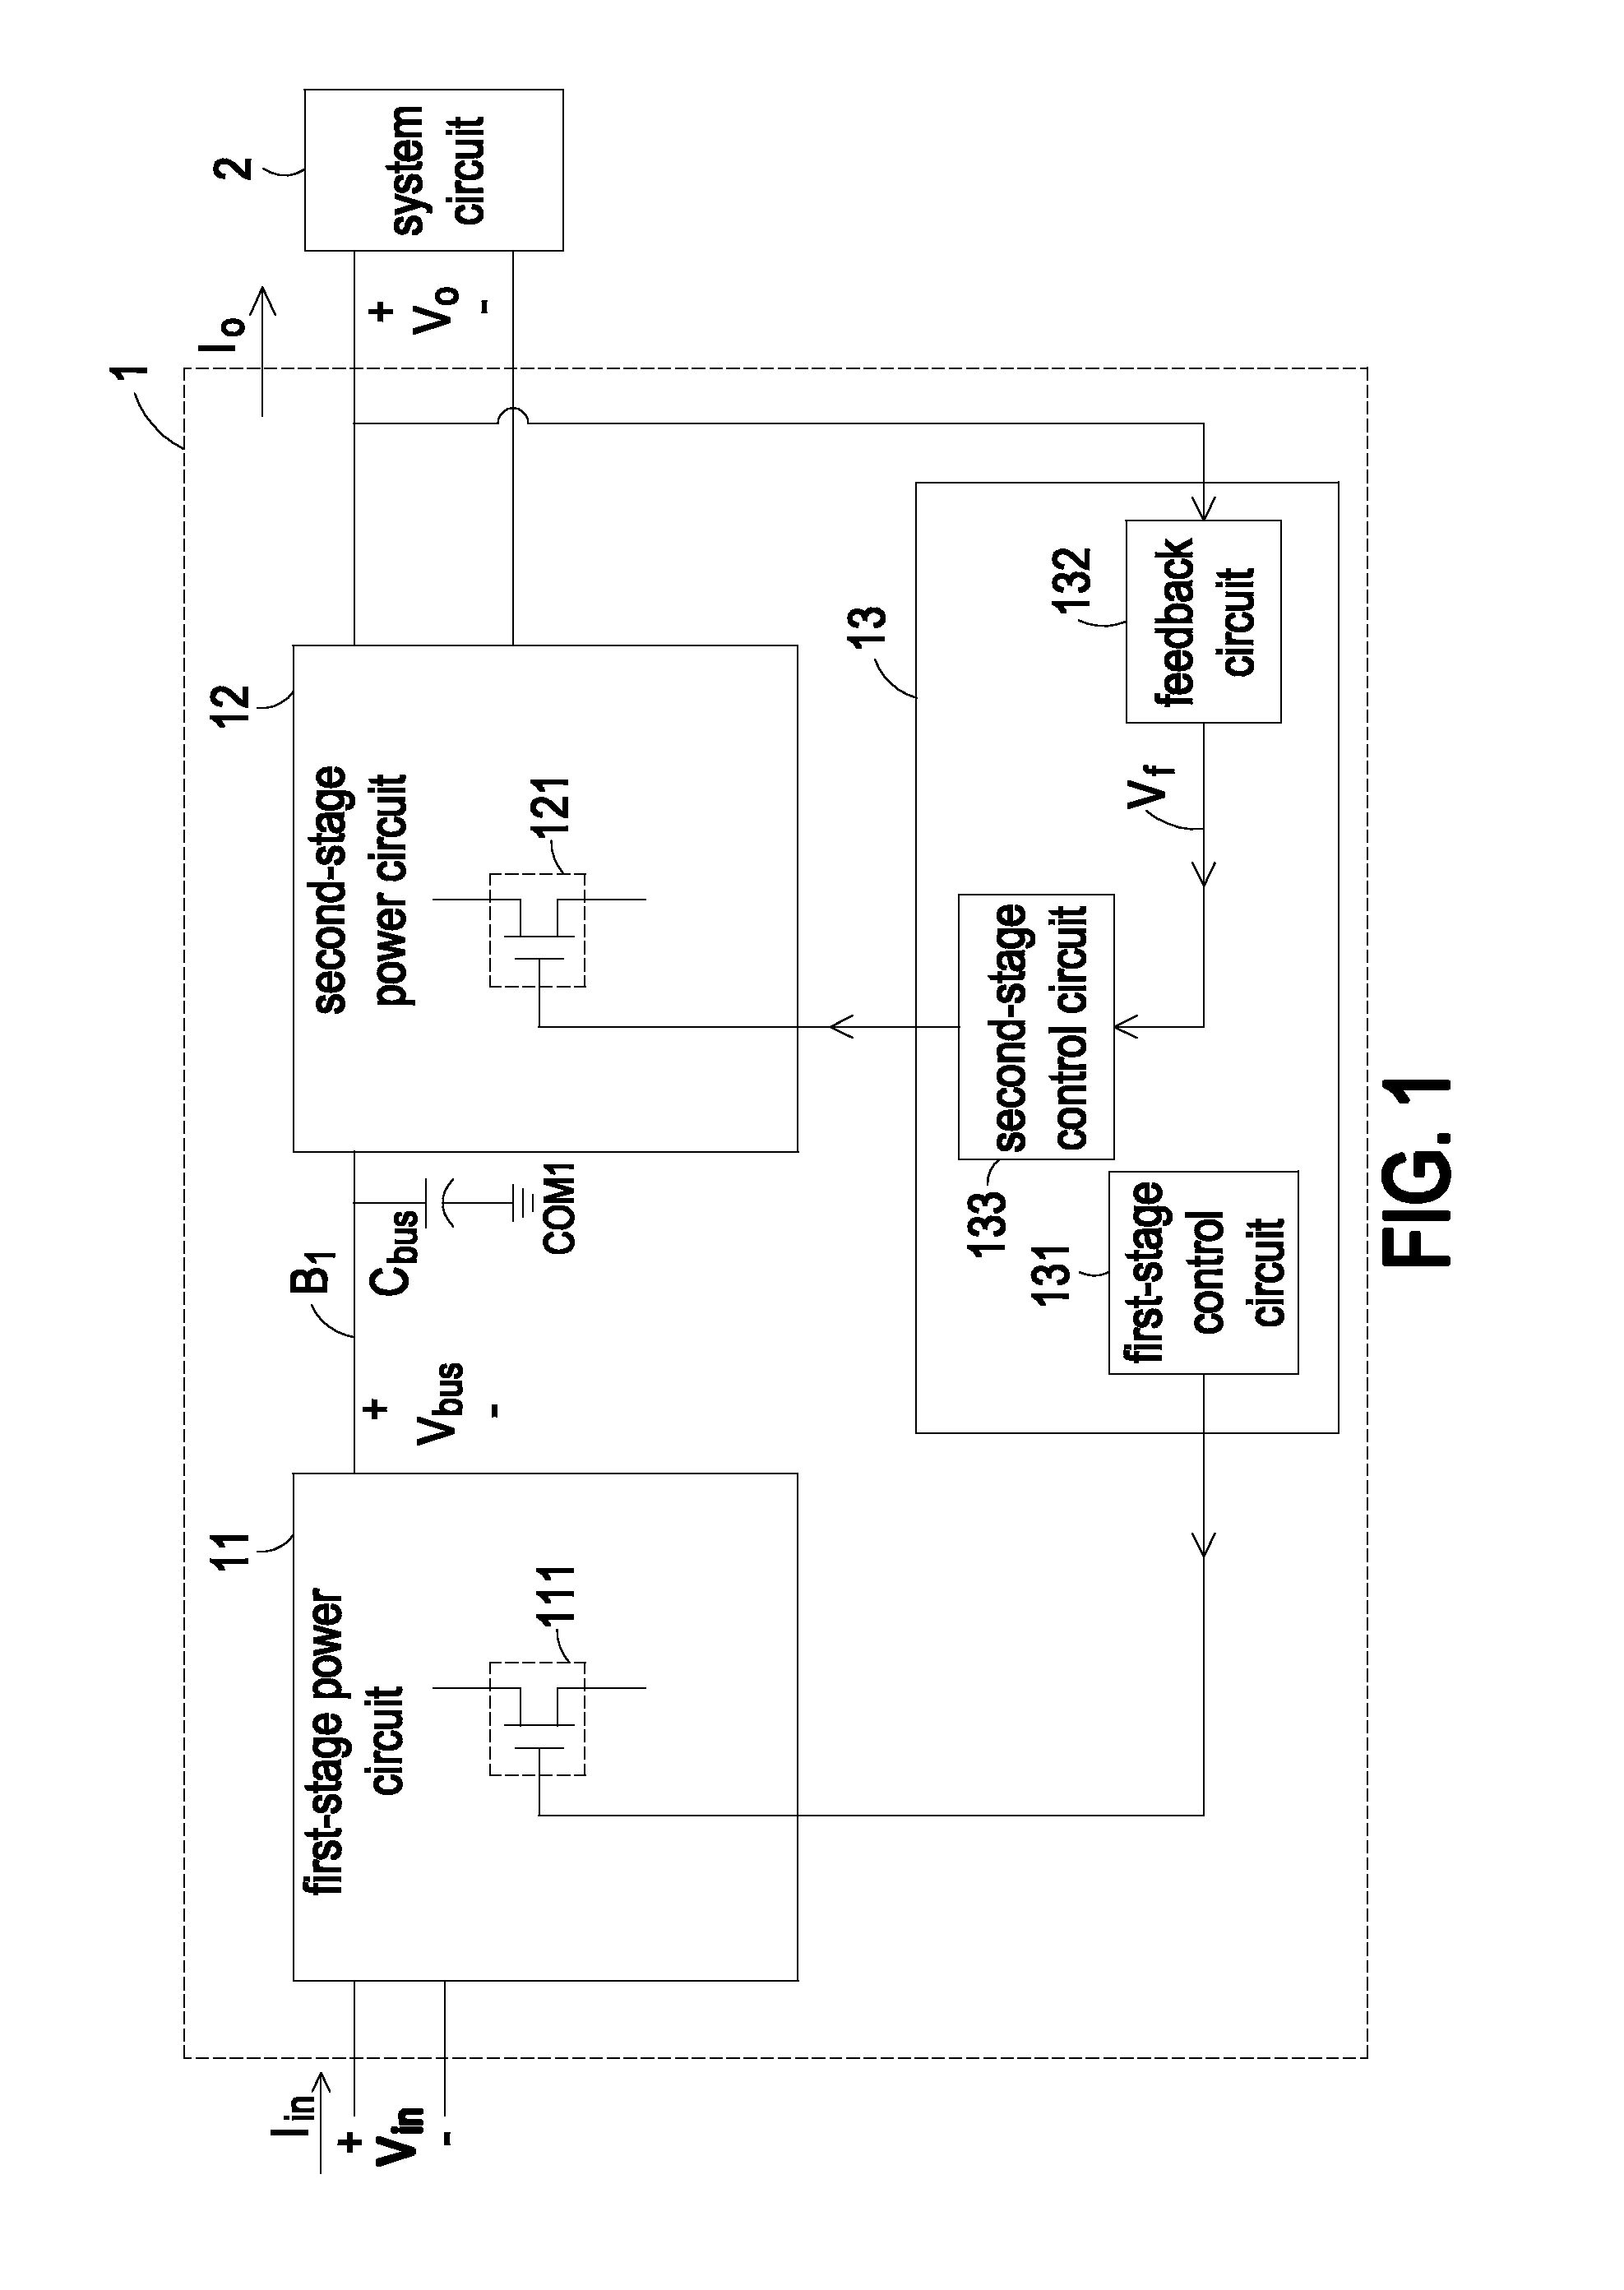 Two-stage switching power supply